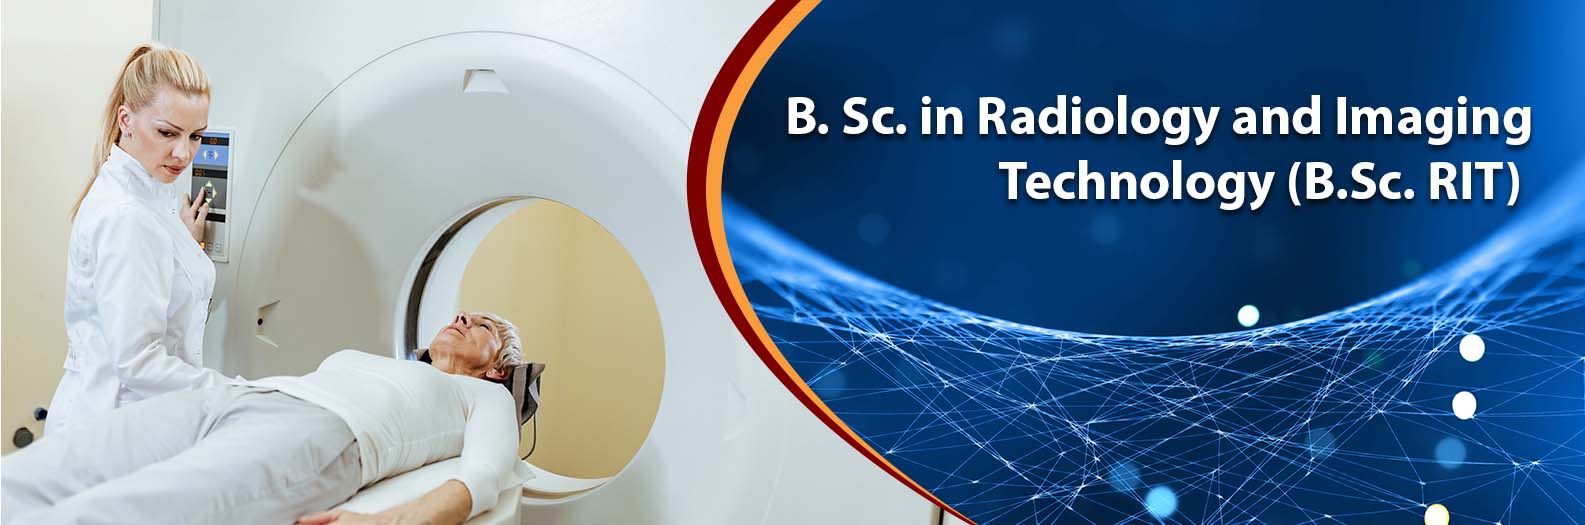 B. Sc. Radiology and Imaging Technology